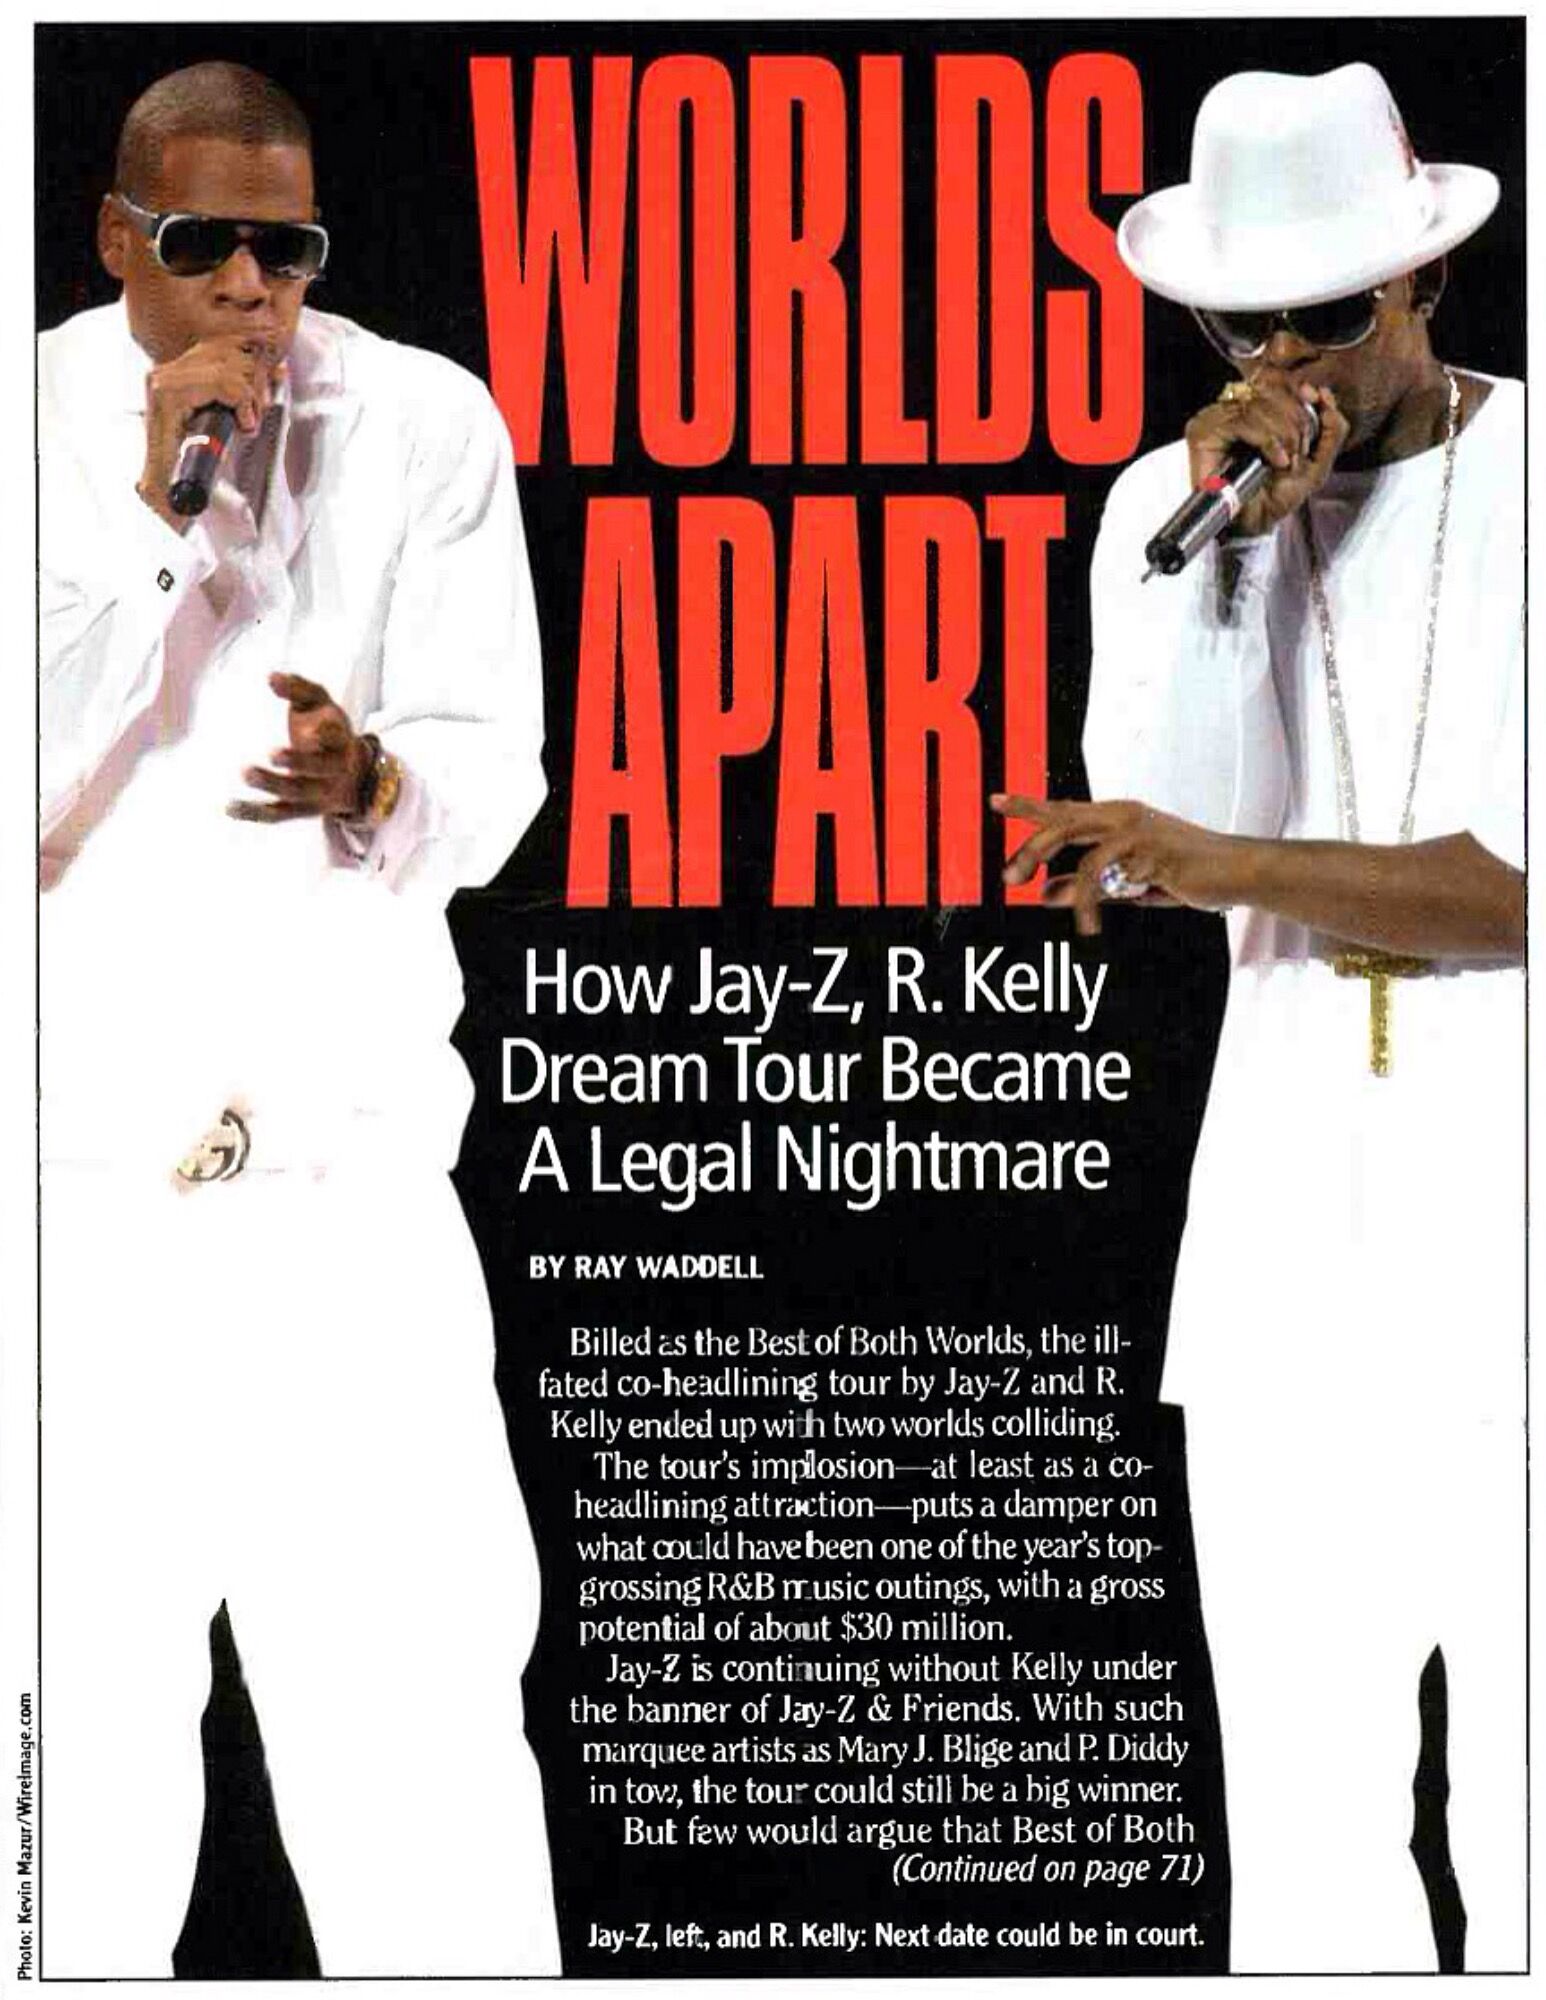 R. Kelly & Jay-Z Best of Both Worlds Tour 2004 | Concerts Wiki ...